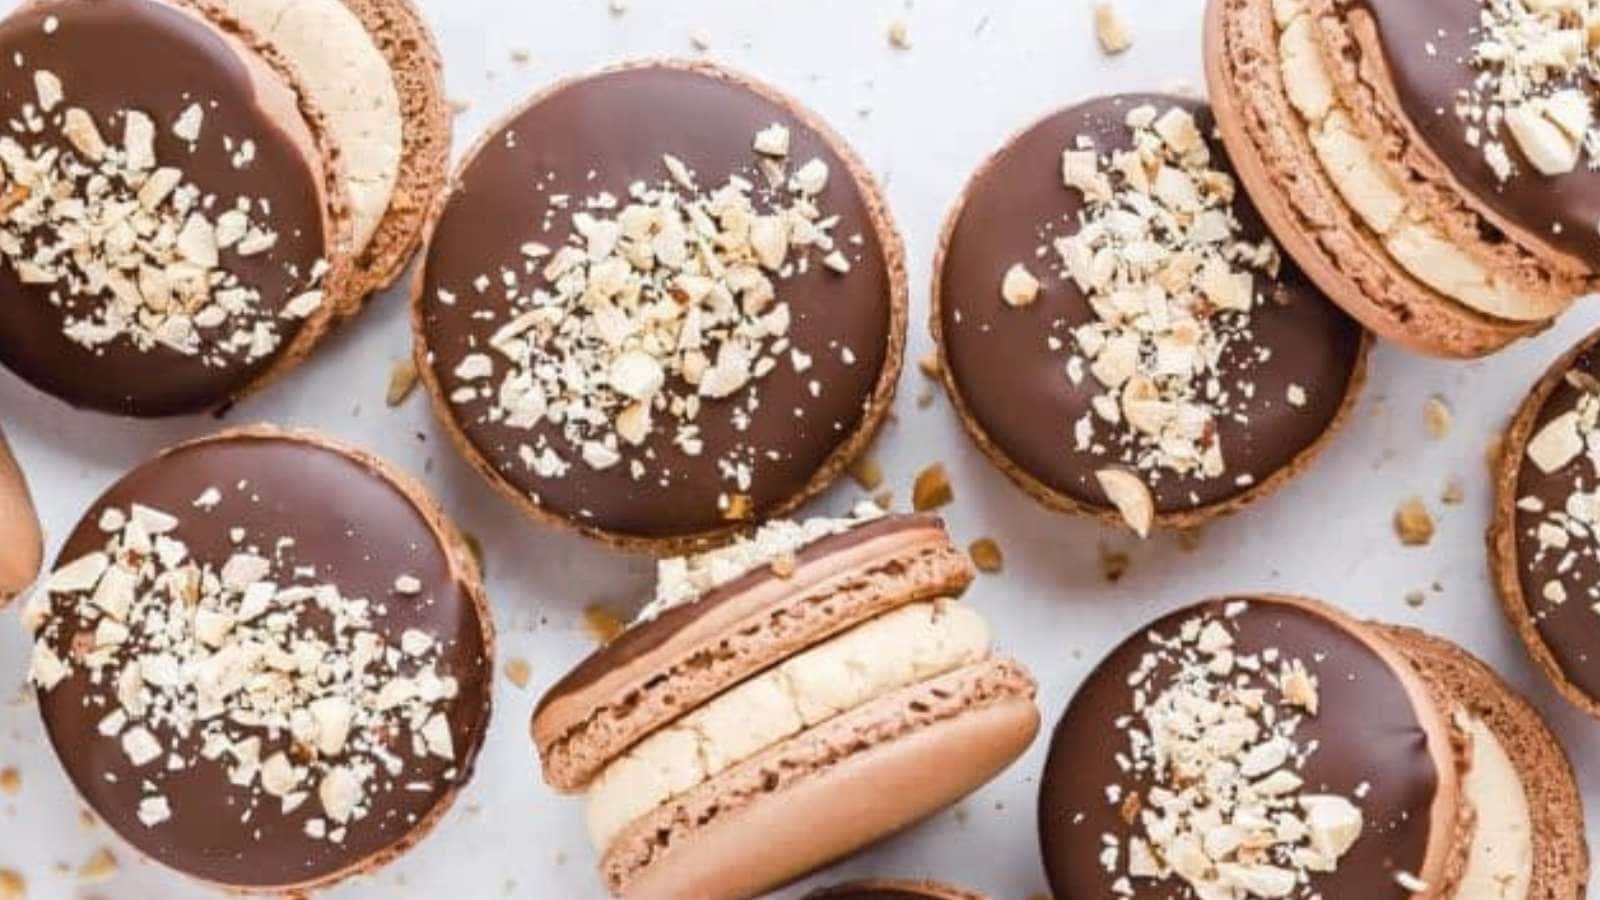 Peanut Butter Chocolate Macarons recipe by Barley and Sage.